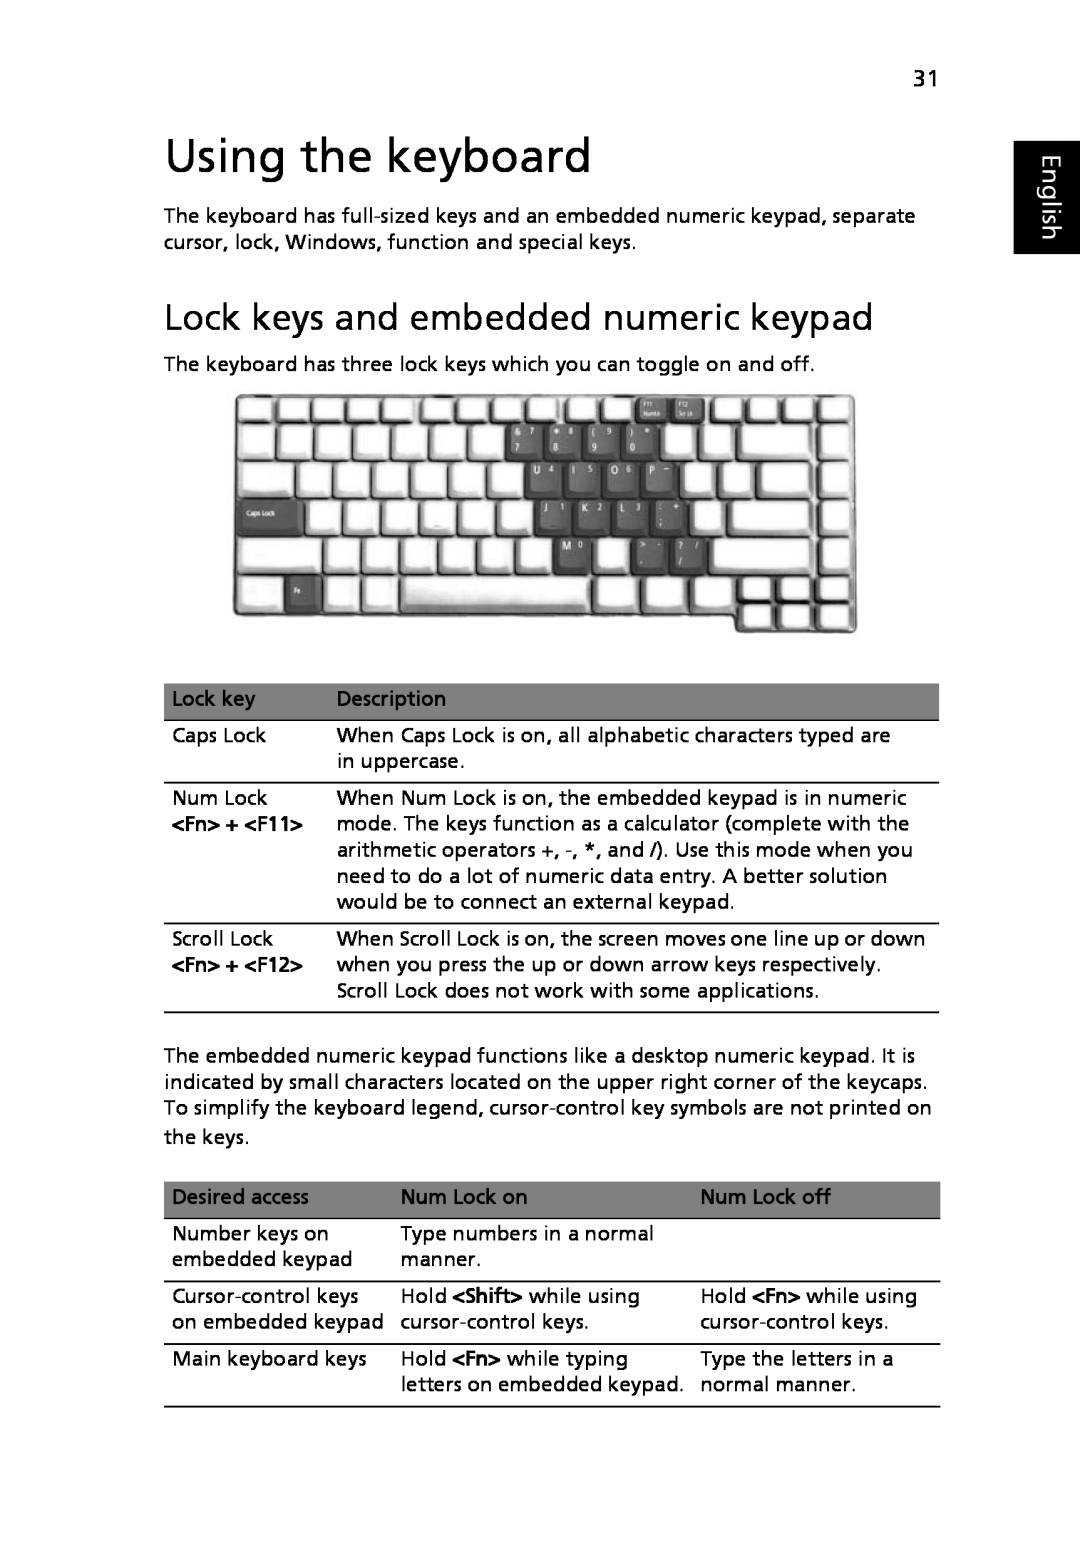 Acer 5010 Series, 5410 Series manual Using the keyboard, Lock keys and embedded numeric keypad, English 